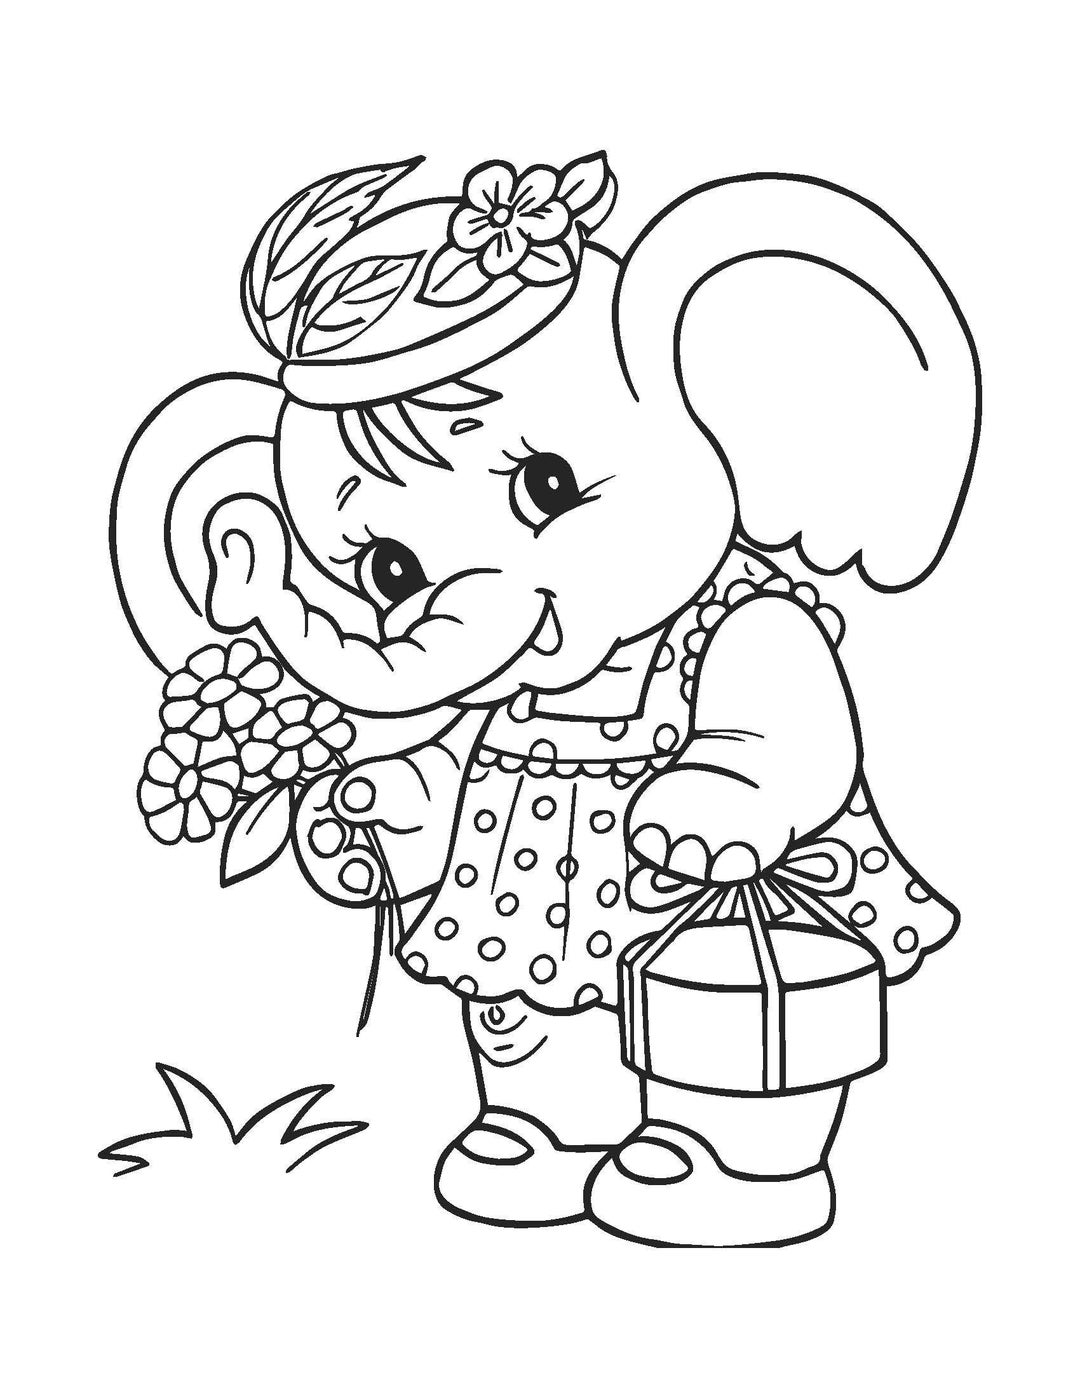 Great2bColorful Coloring Poster (3 Sizes~2 Paper Choices) - Ellie Elephant 24 x 36 / Folded Economy Paper